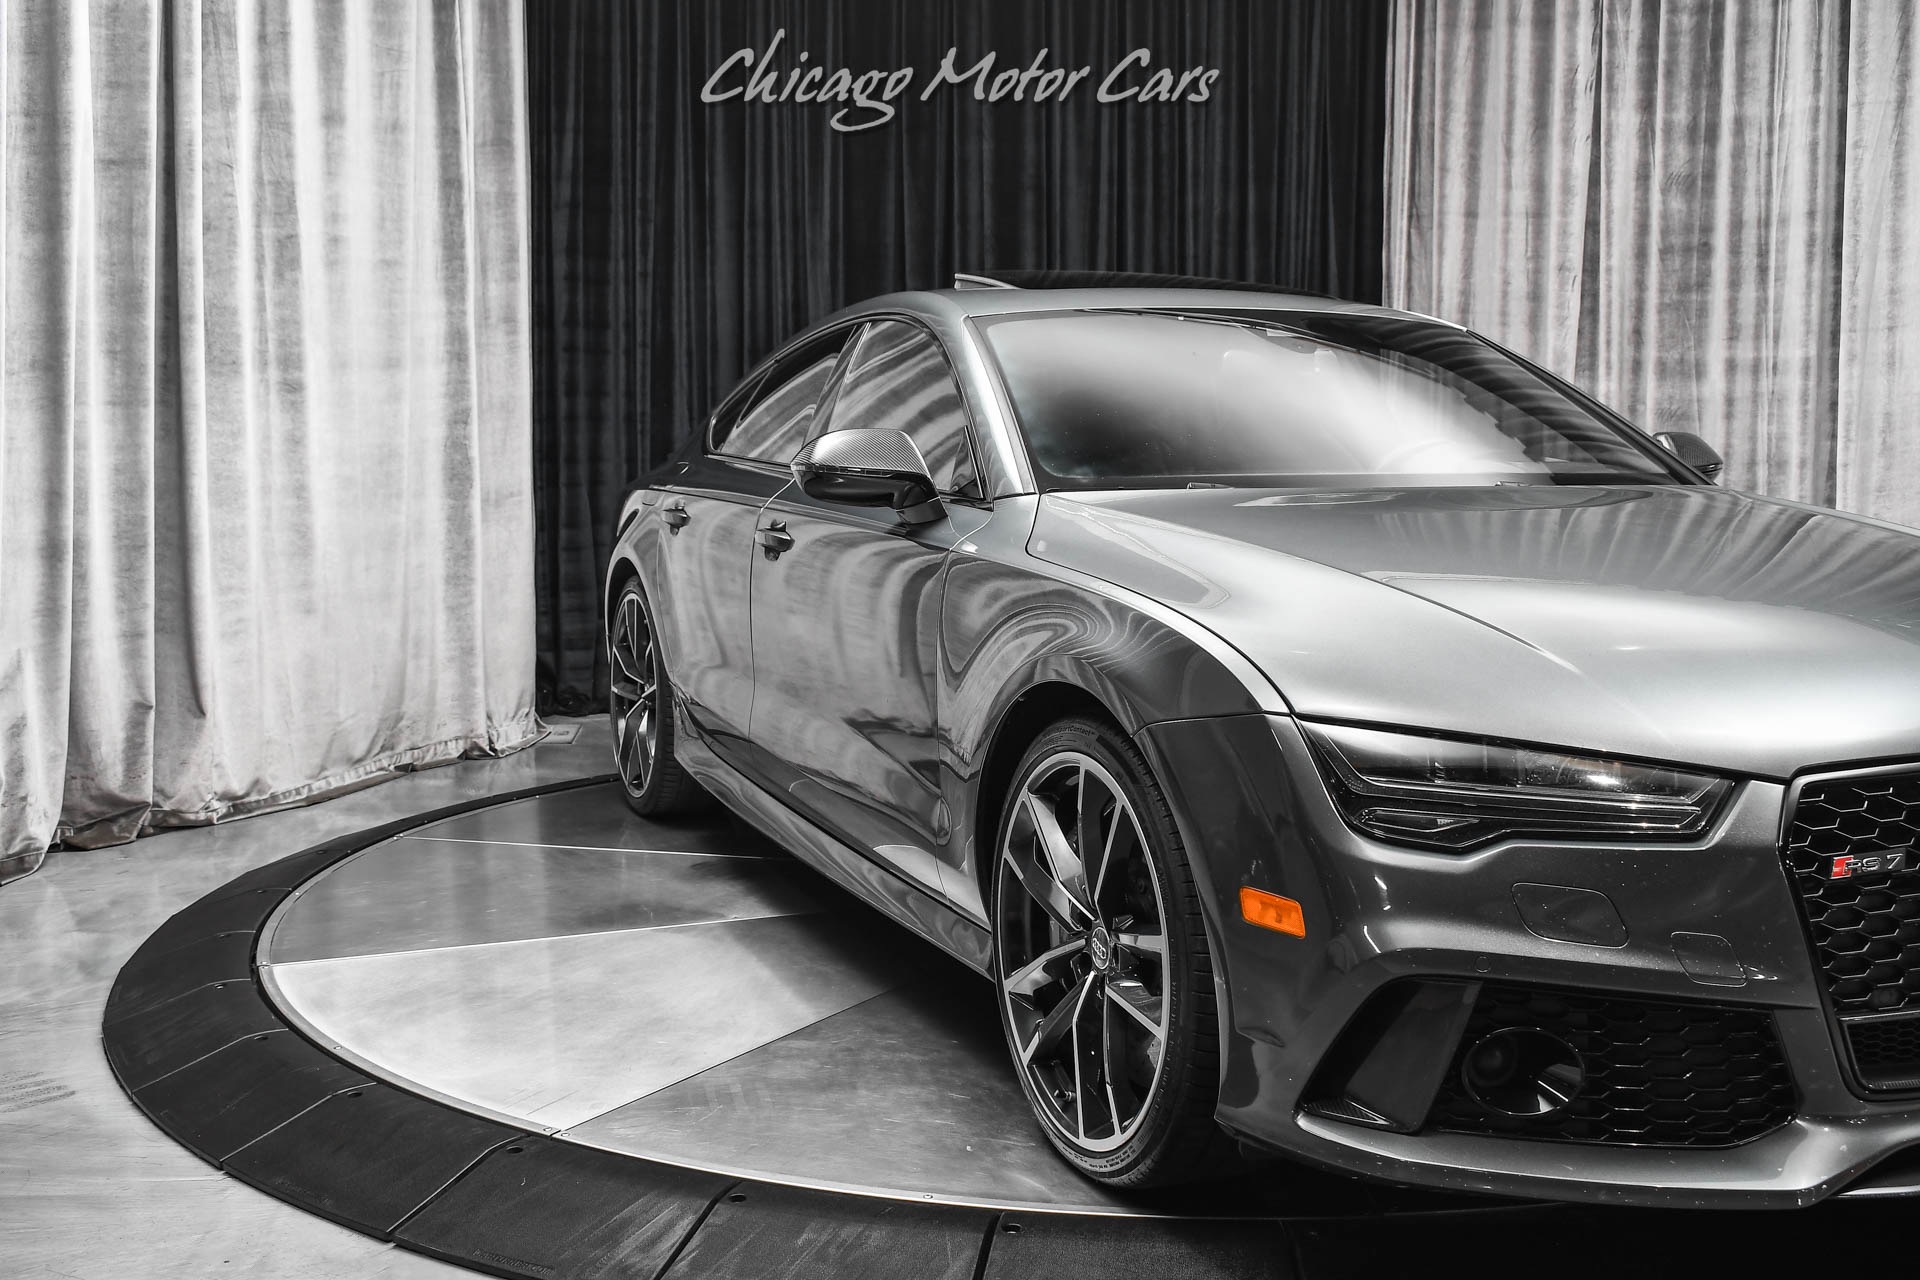 Used-2016-Audi-RS7-40T-Quattro-Performance-Driver-Assistance-Pkg-Upgraded-Exhaust-APR-Tune